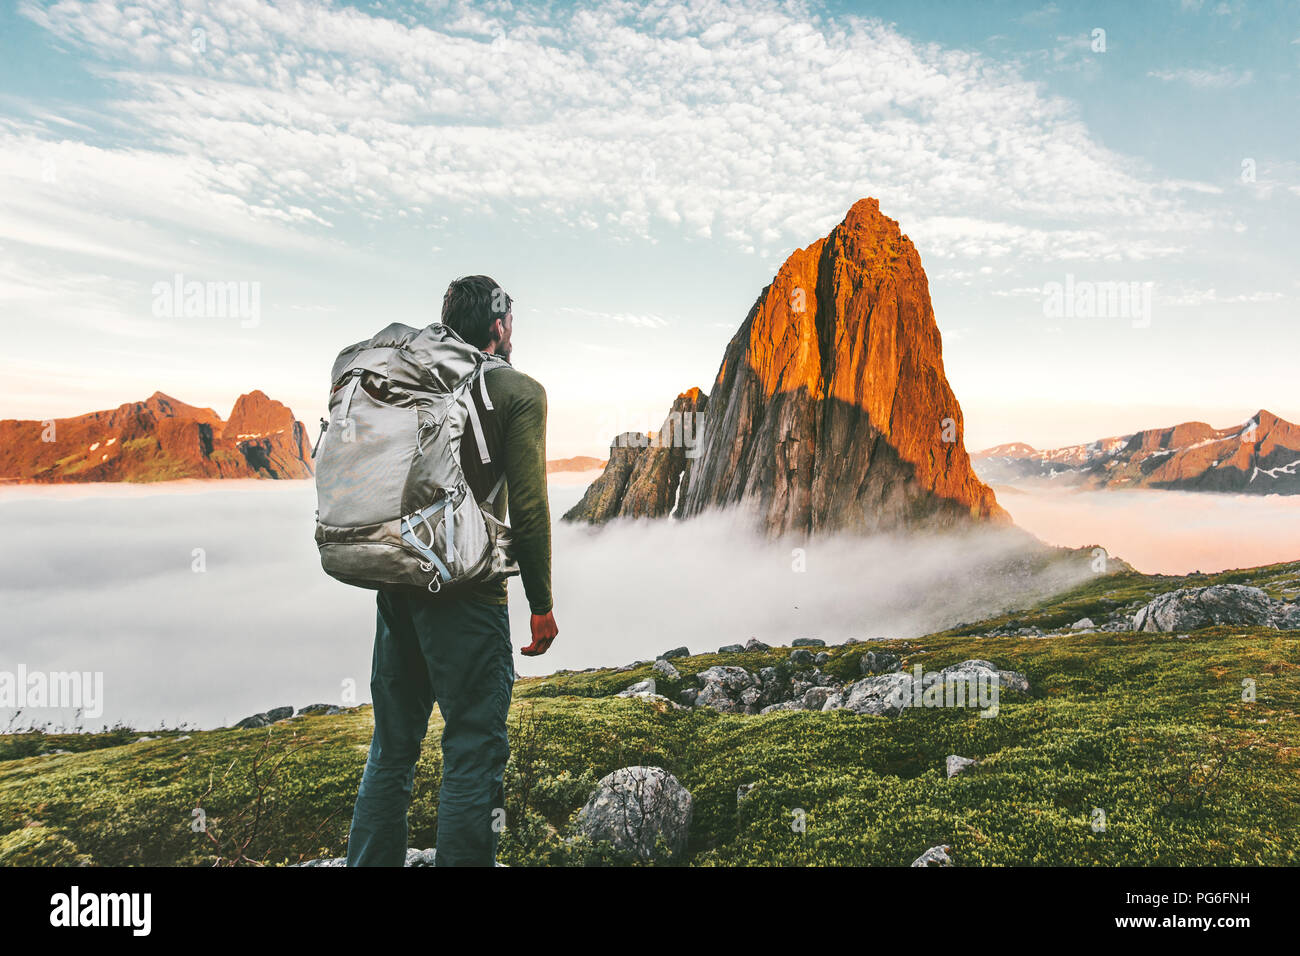 Backpacker man exploring sunset rocky mountains alone hiking